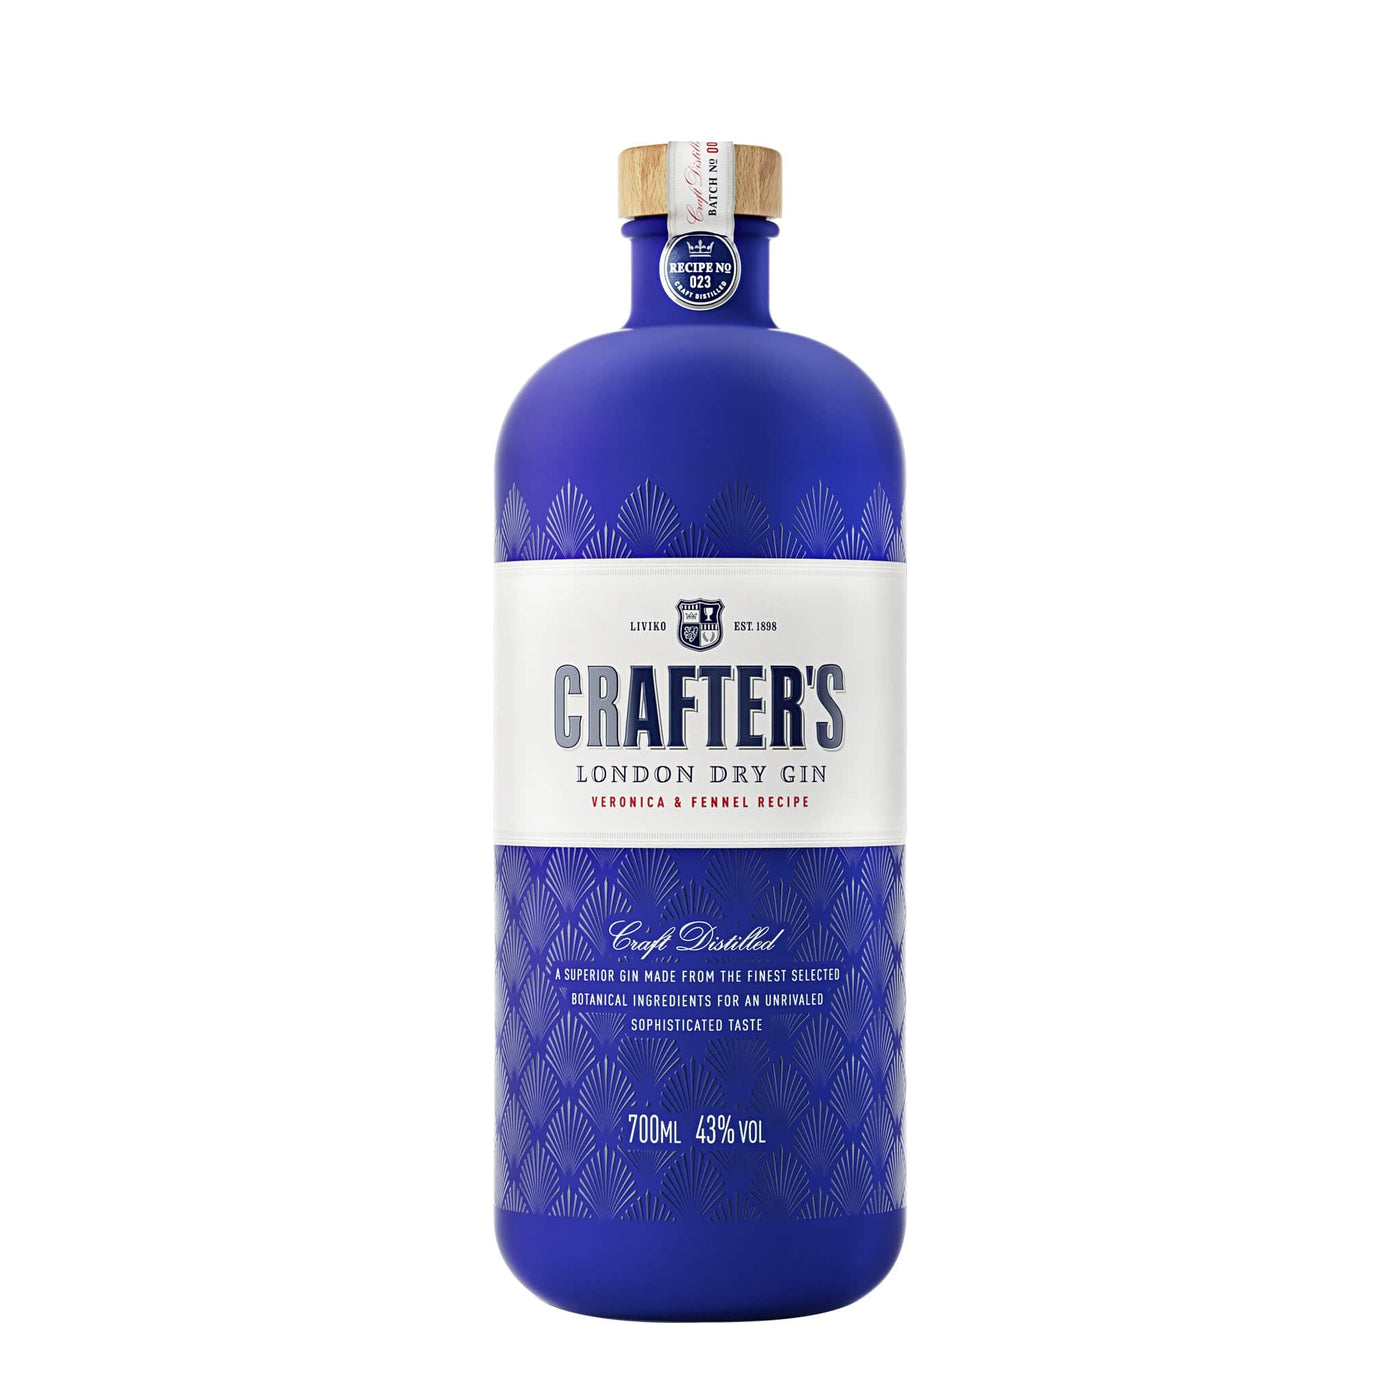 Crafters London Dry Gin - Spiritly